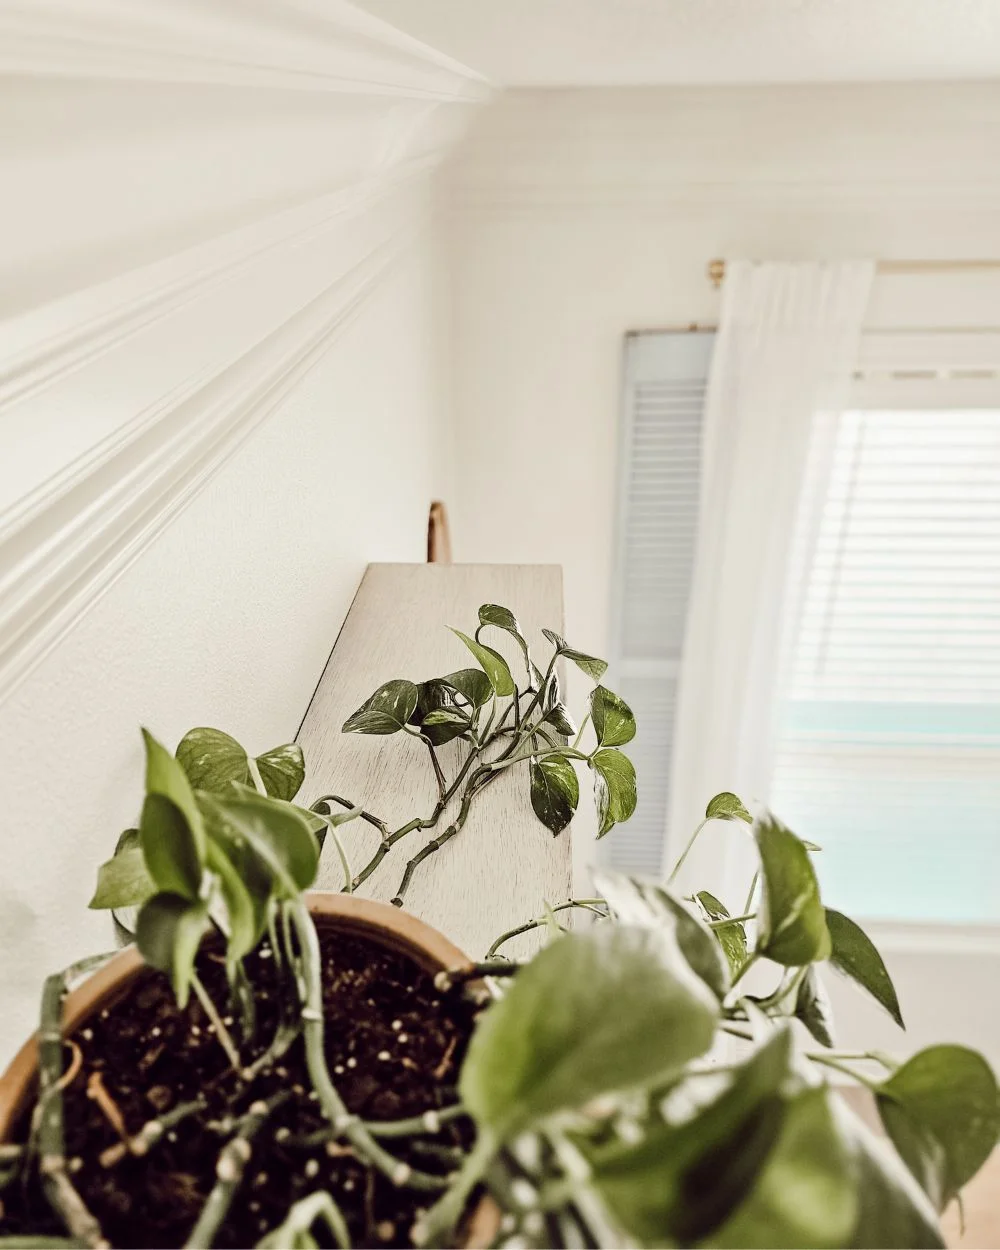 Easy DIY plant shelf made with corbels and plywood